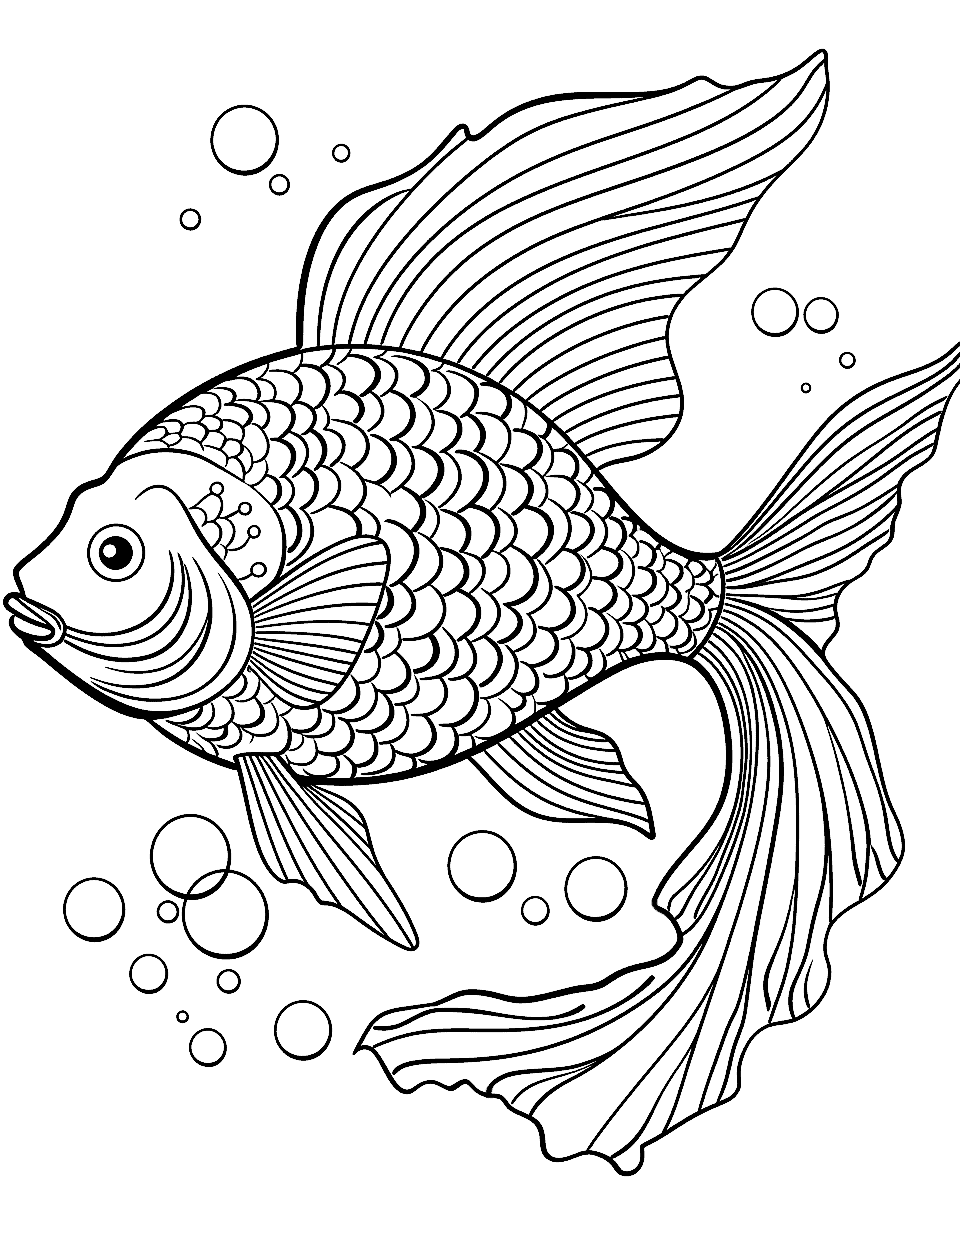 Fish's Patterned Fins Adult Coloring Page - A fish displaying its beautiful fin patterns.